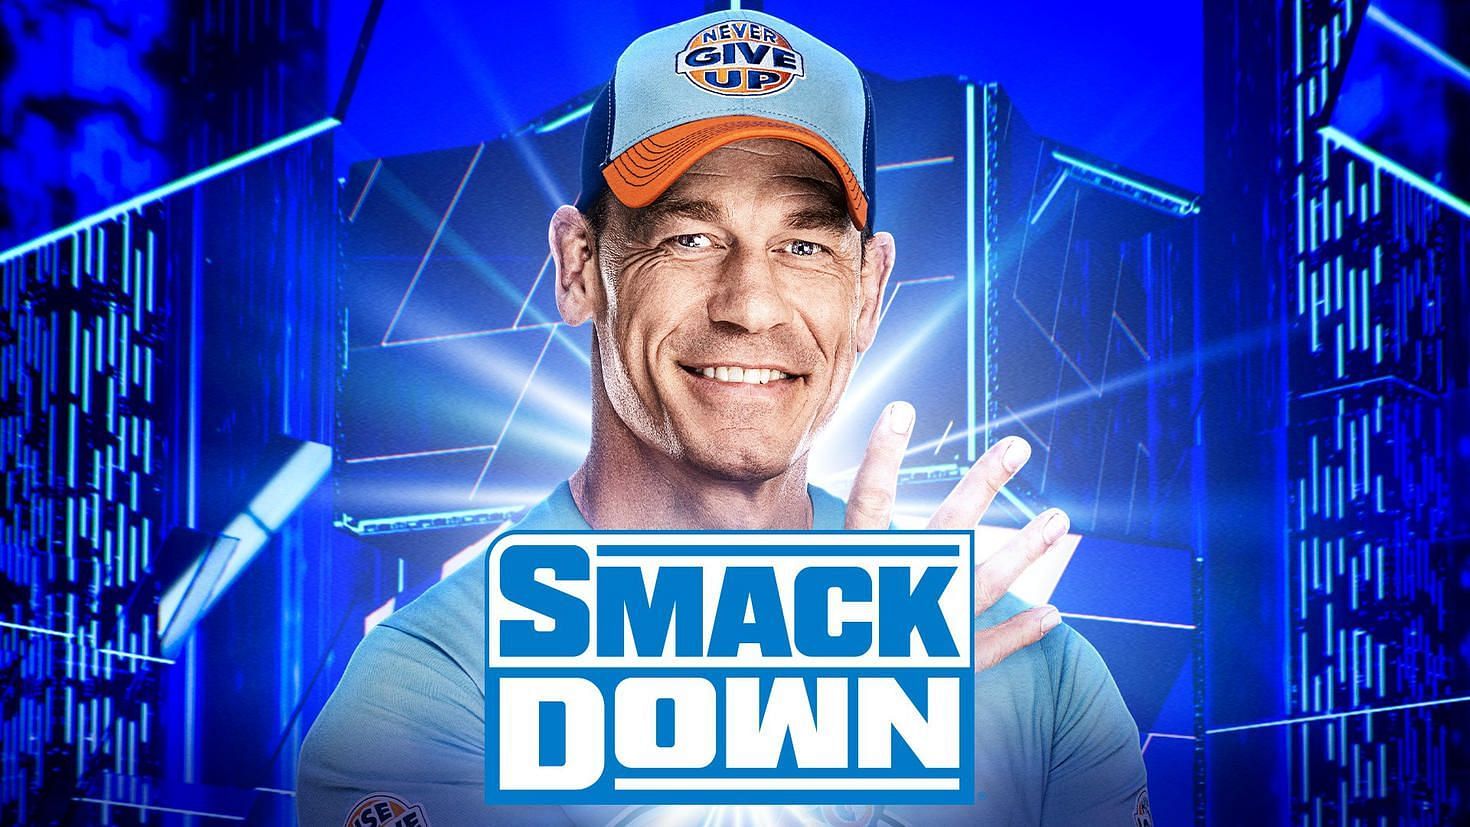 WWE Legend John Cena will be returning to SmackDown next month